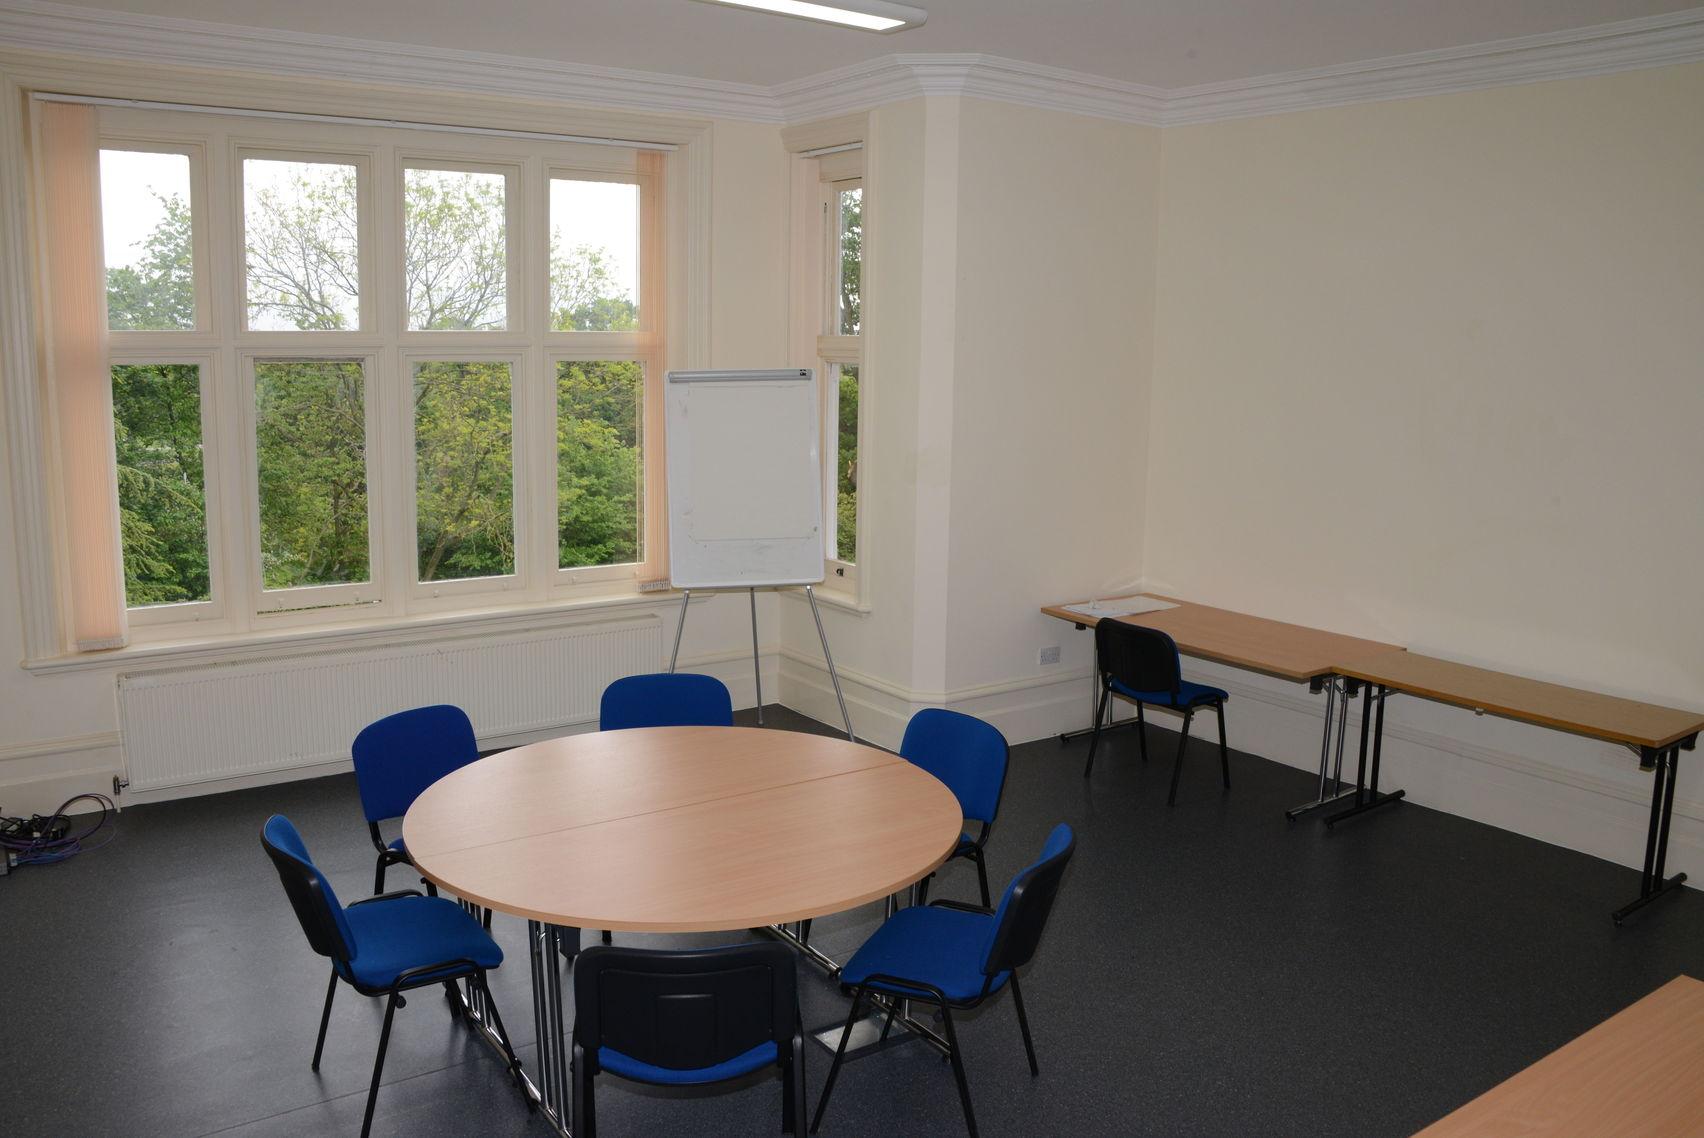 Battersea Dogs And Cats Home - Old Windsor, Meeting Room photo #3